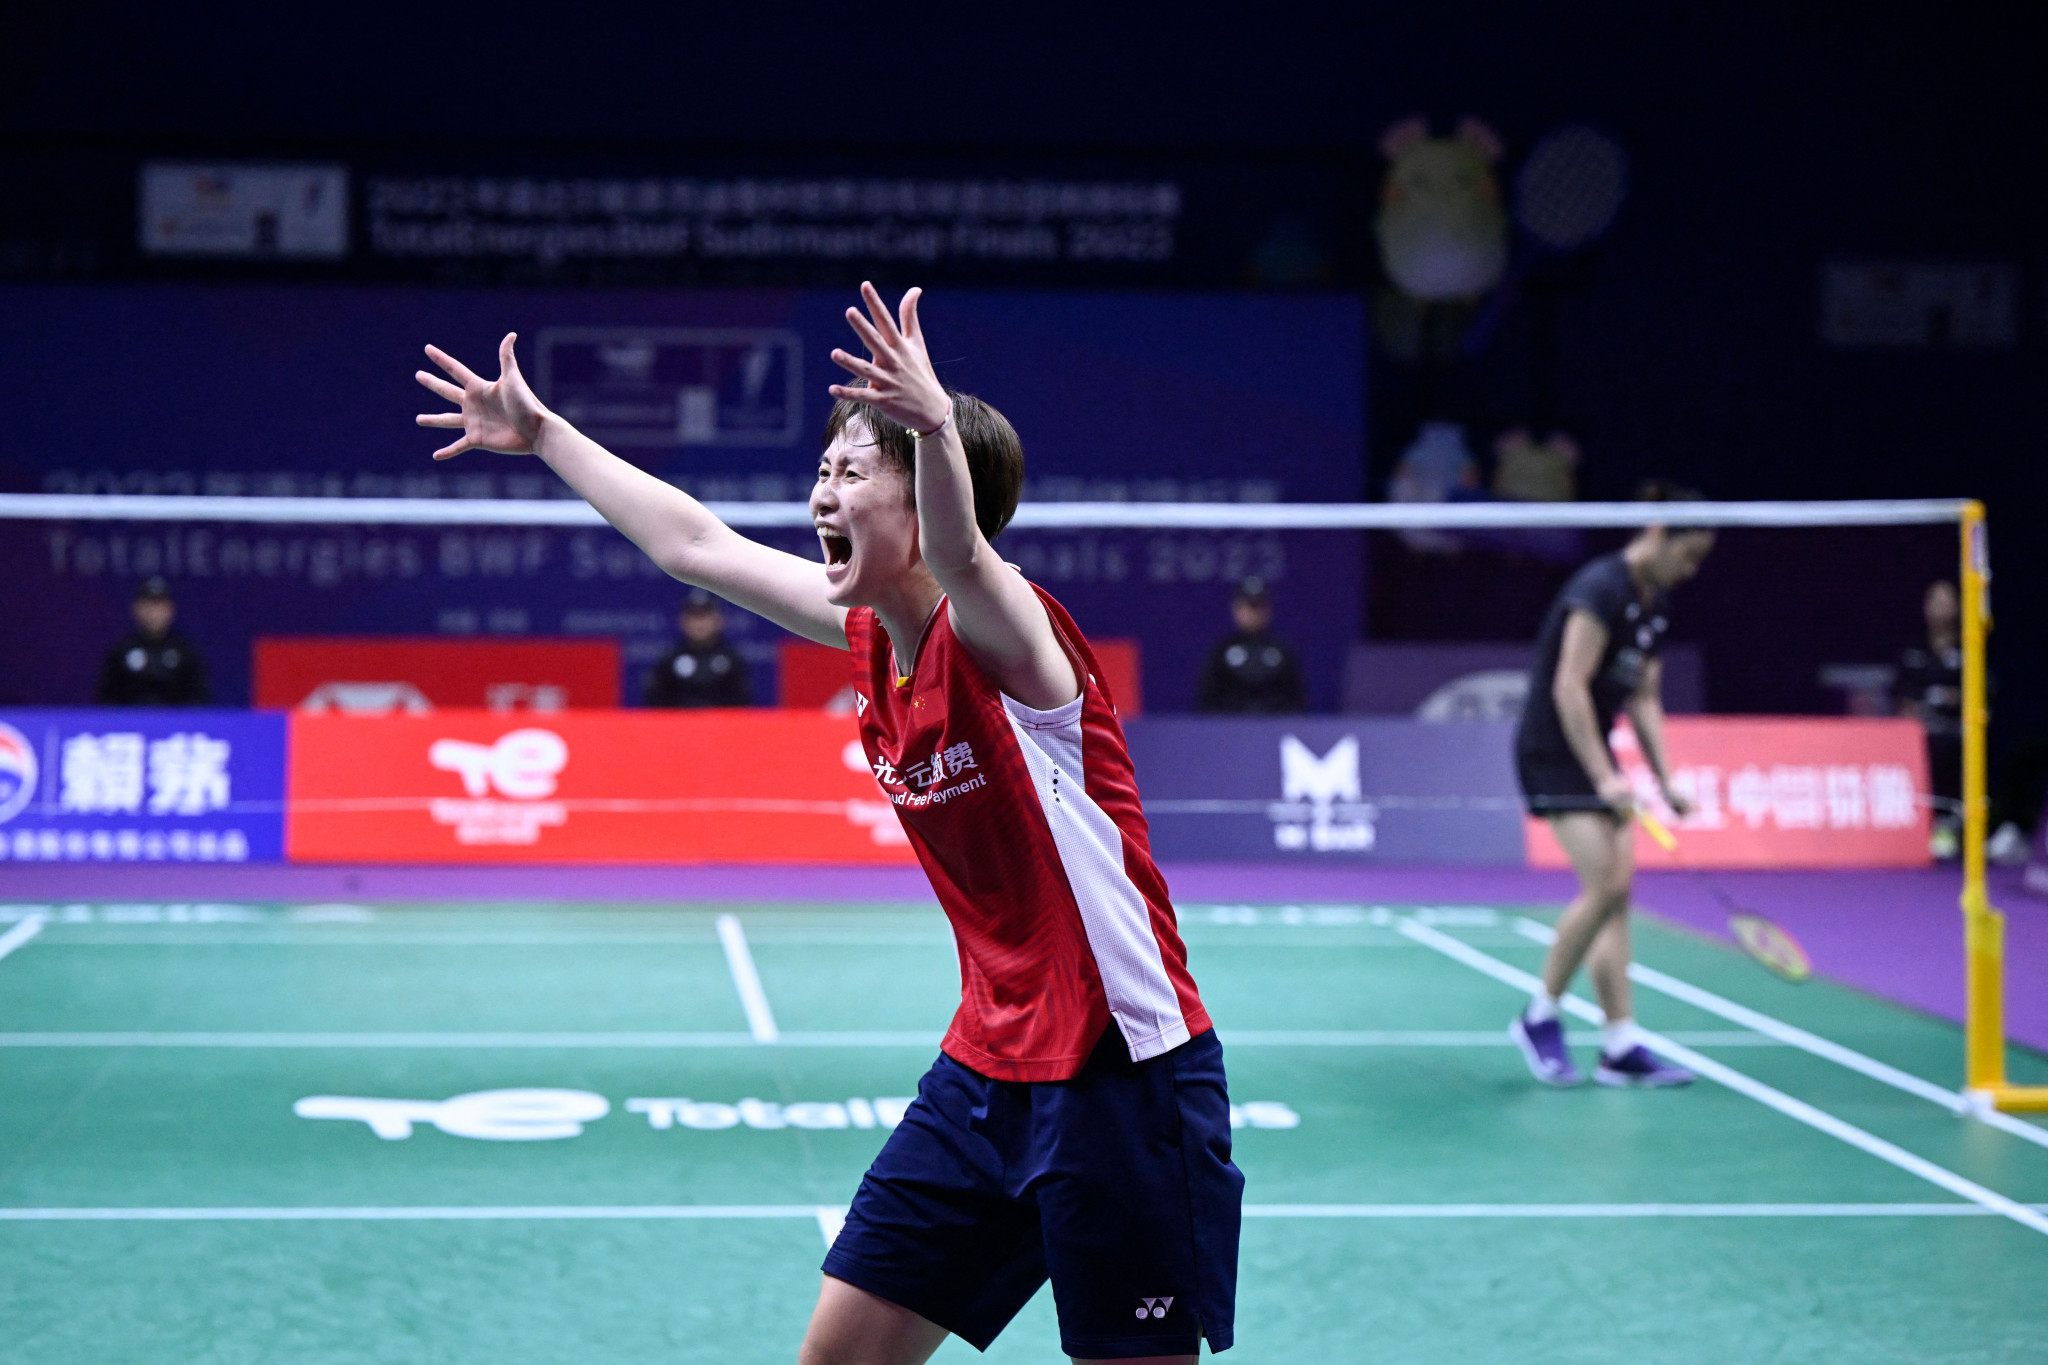 Olympic champion Chen Yufei provided the clinching victory for China in the Sudirman Cup final against South Korea's An Se-young ©Getty Images